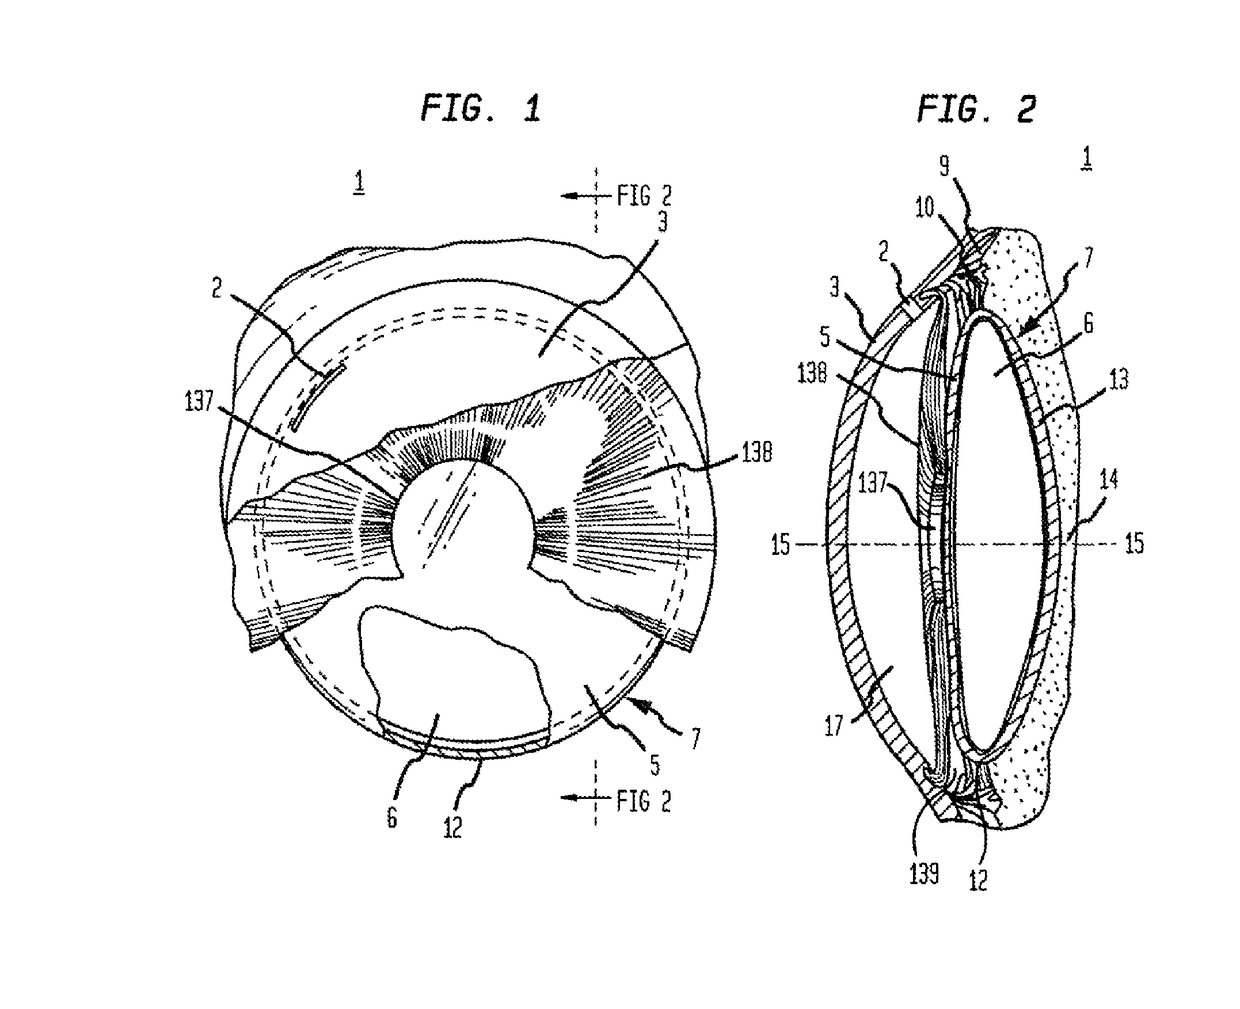 Micropatterned intraocular implants